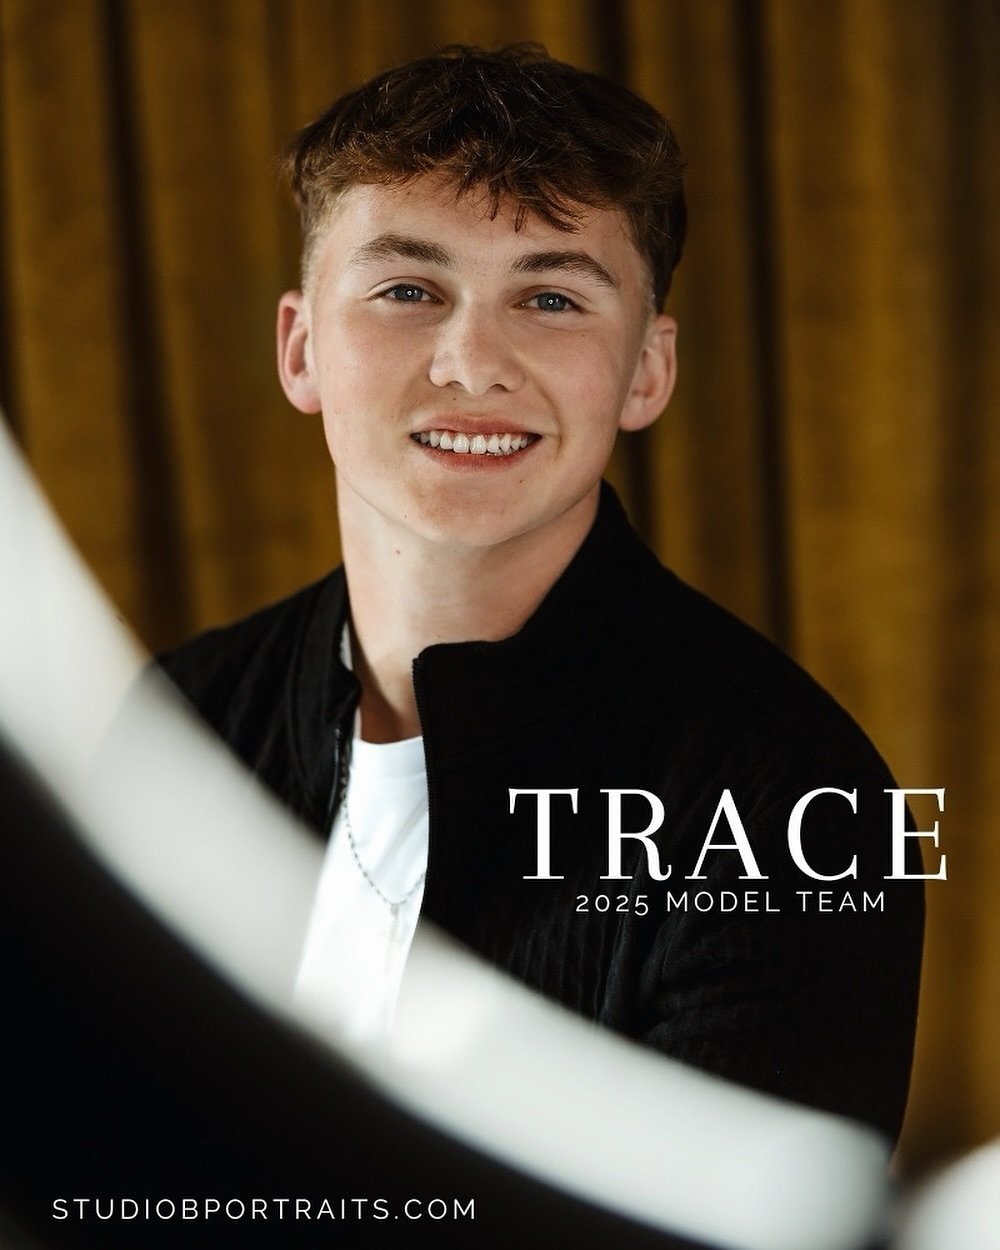 First look at Trace for the Class of 2025 🙌🏼 

We are now booking summer senior pictures and would love the opportunity to be a part of your graduation milestone! Link in bio to schedule now!

#studiobportraits #studiobseniors #seniorpictures #issa